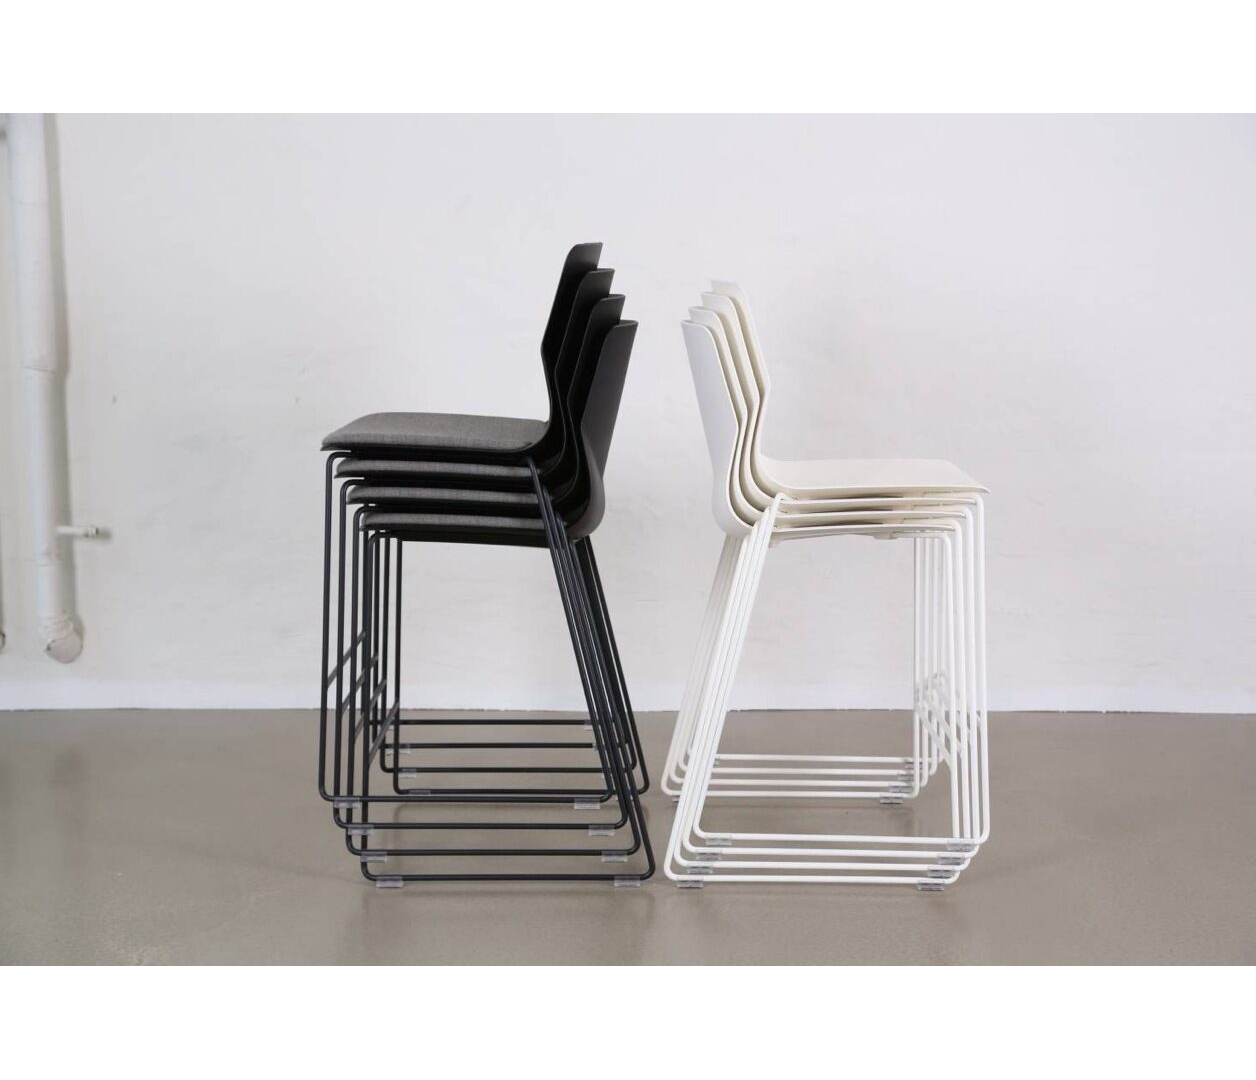 OCEE&FOUR – Chairs – FourSure 105 – Details Image 2 Large Large